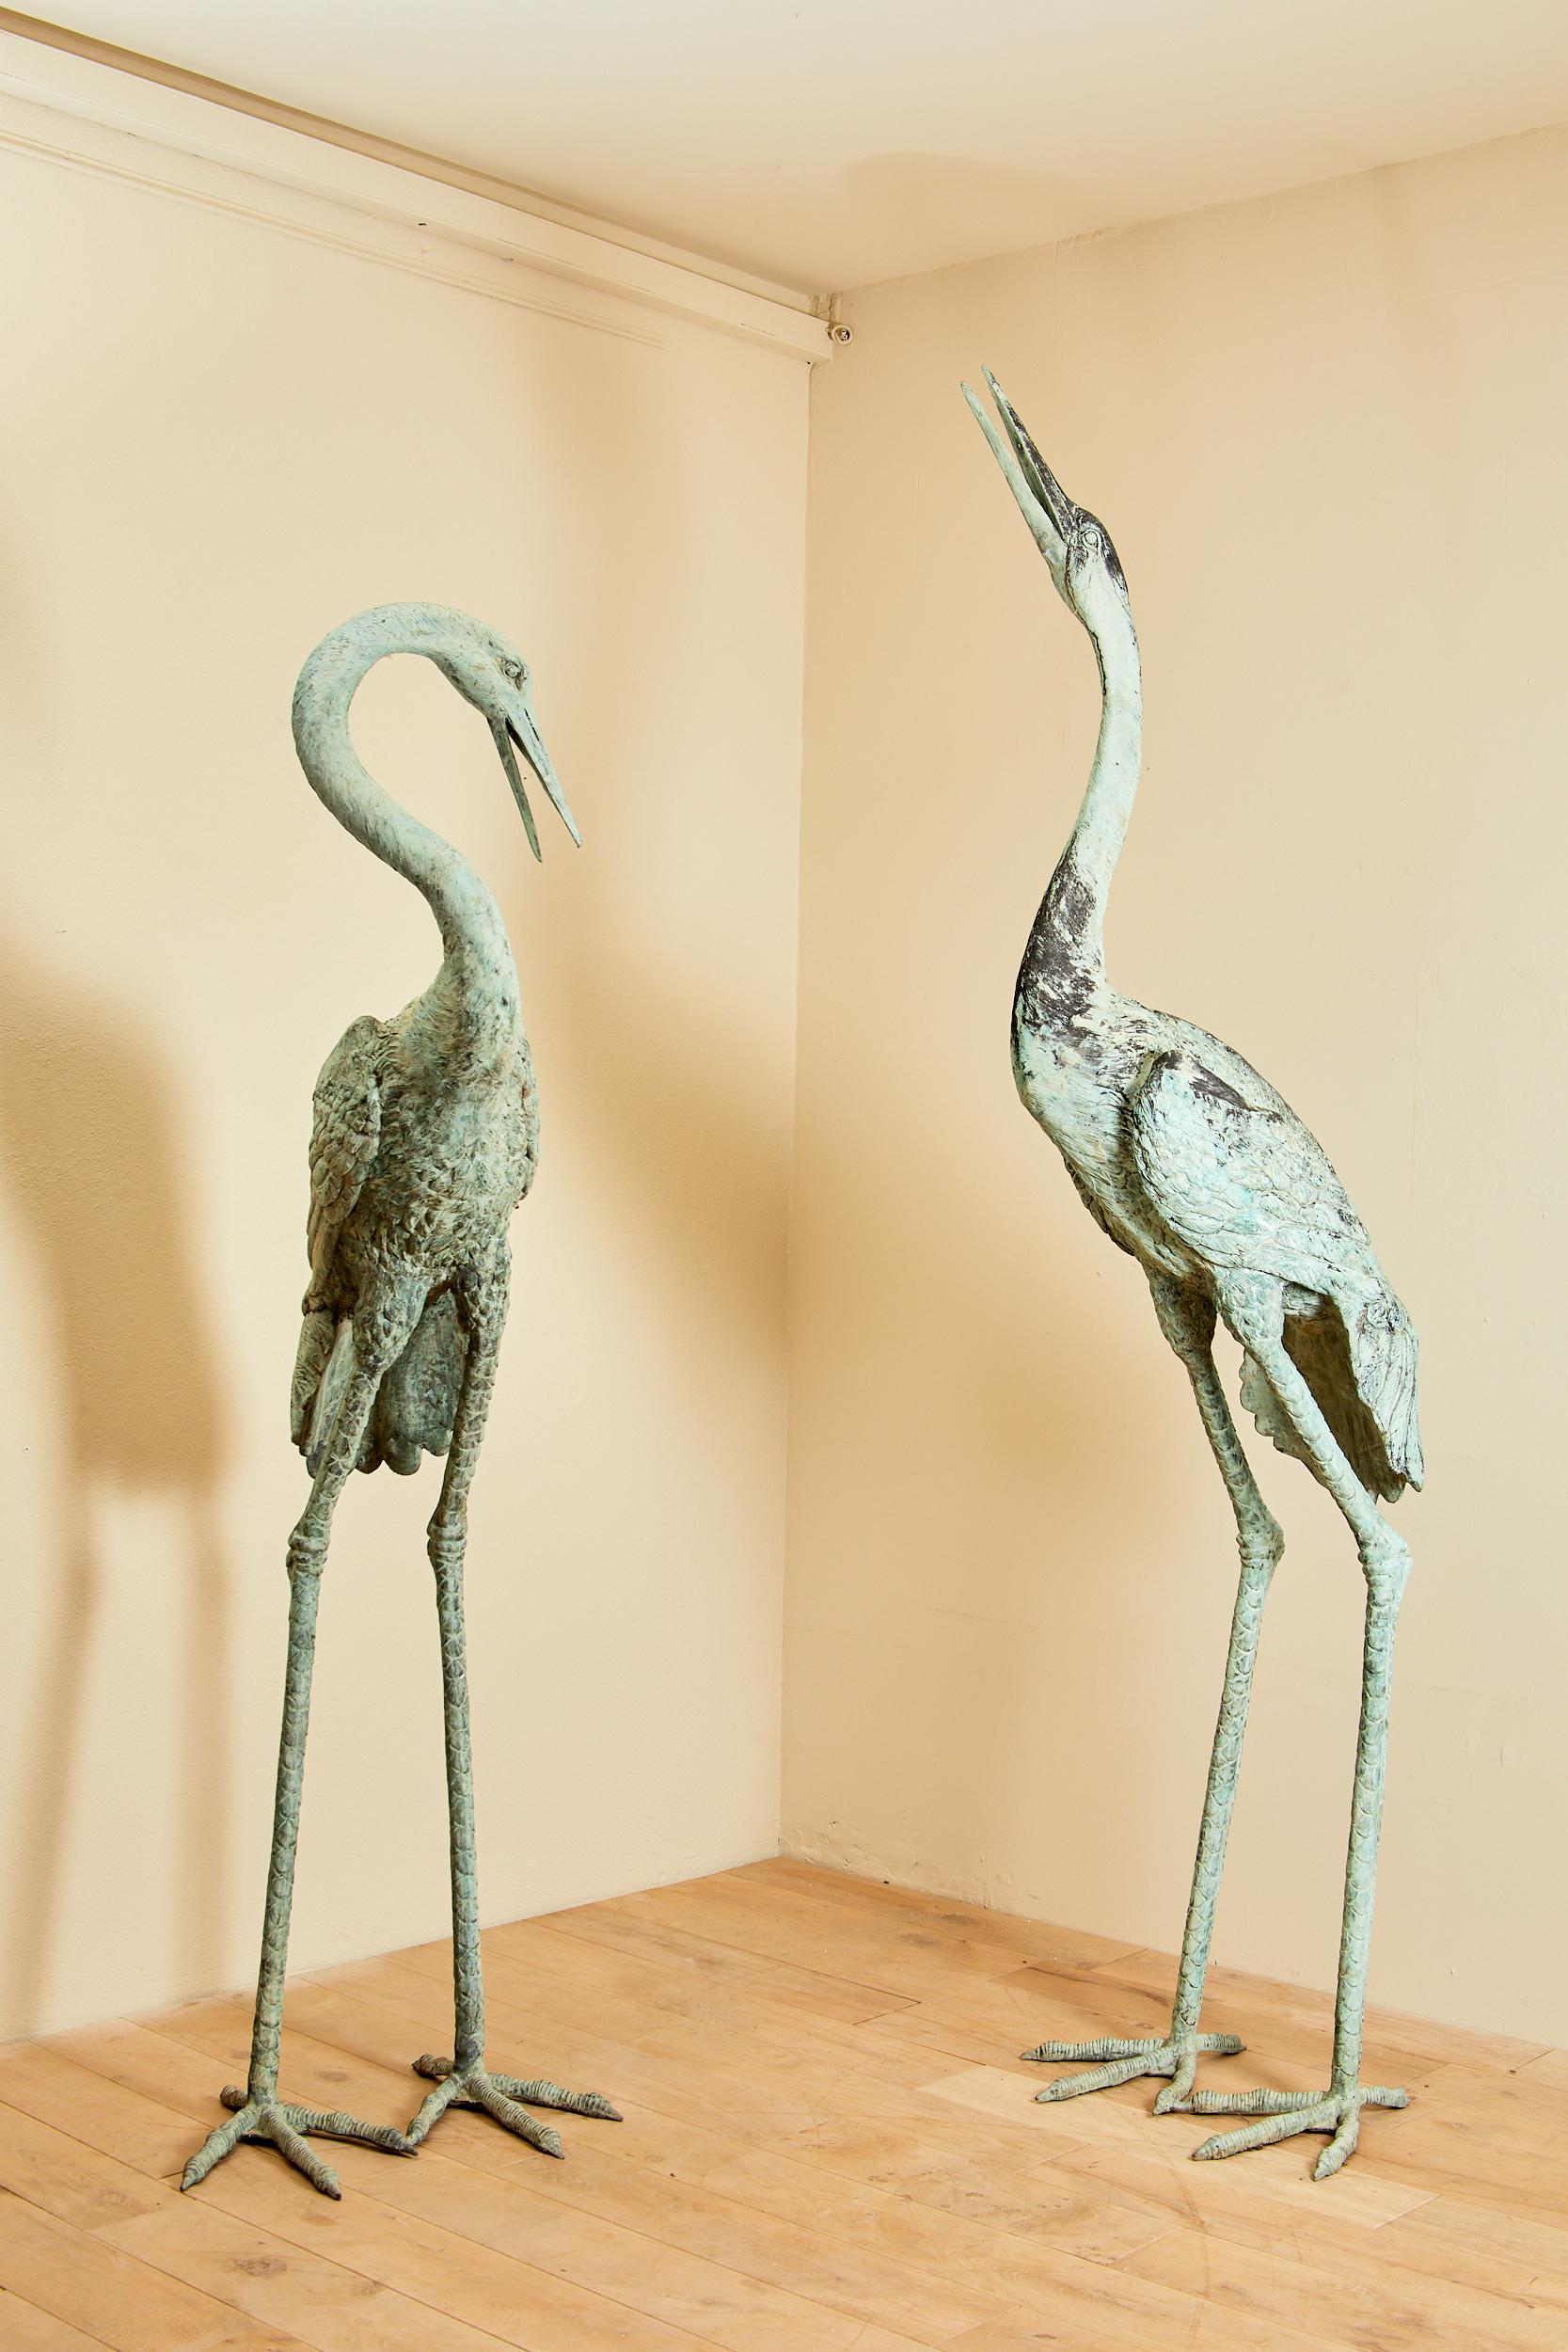 Pair of herons, 
sculpture, 
Paine bronze iron, 
circa 2000, France. 
Height (the one with the neck upwards) 2m70, diameter 80 cm, 
the other heron height 2m25, diameter 75 cm.